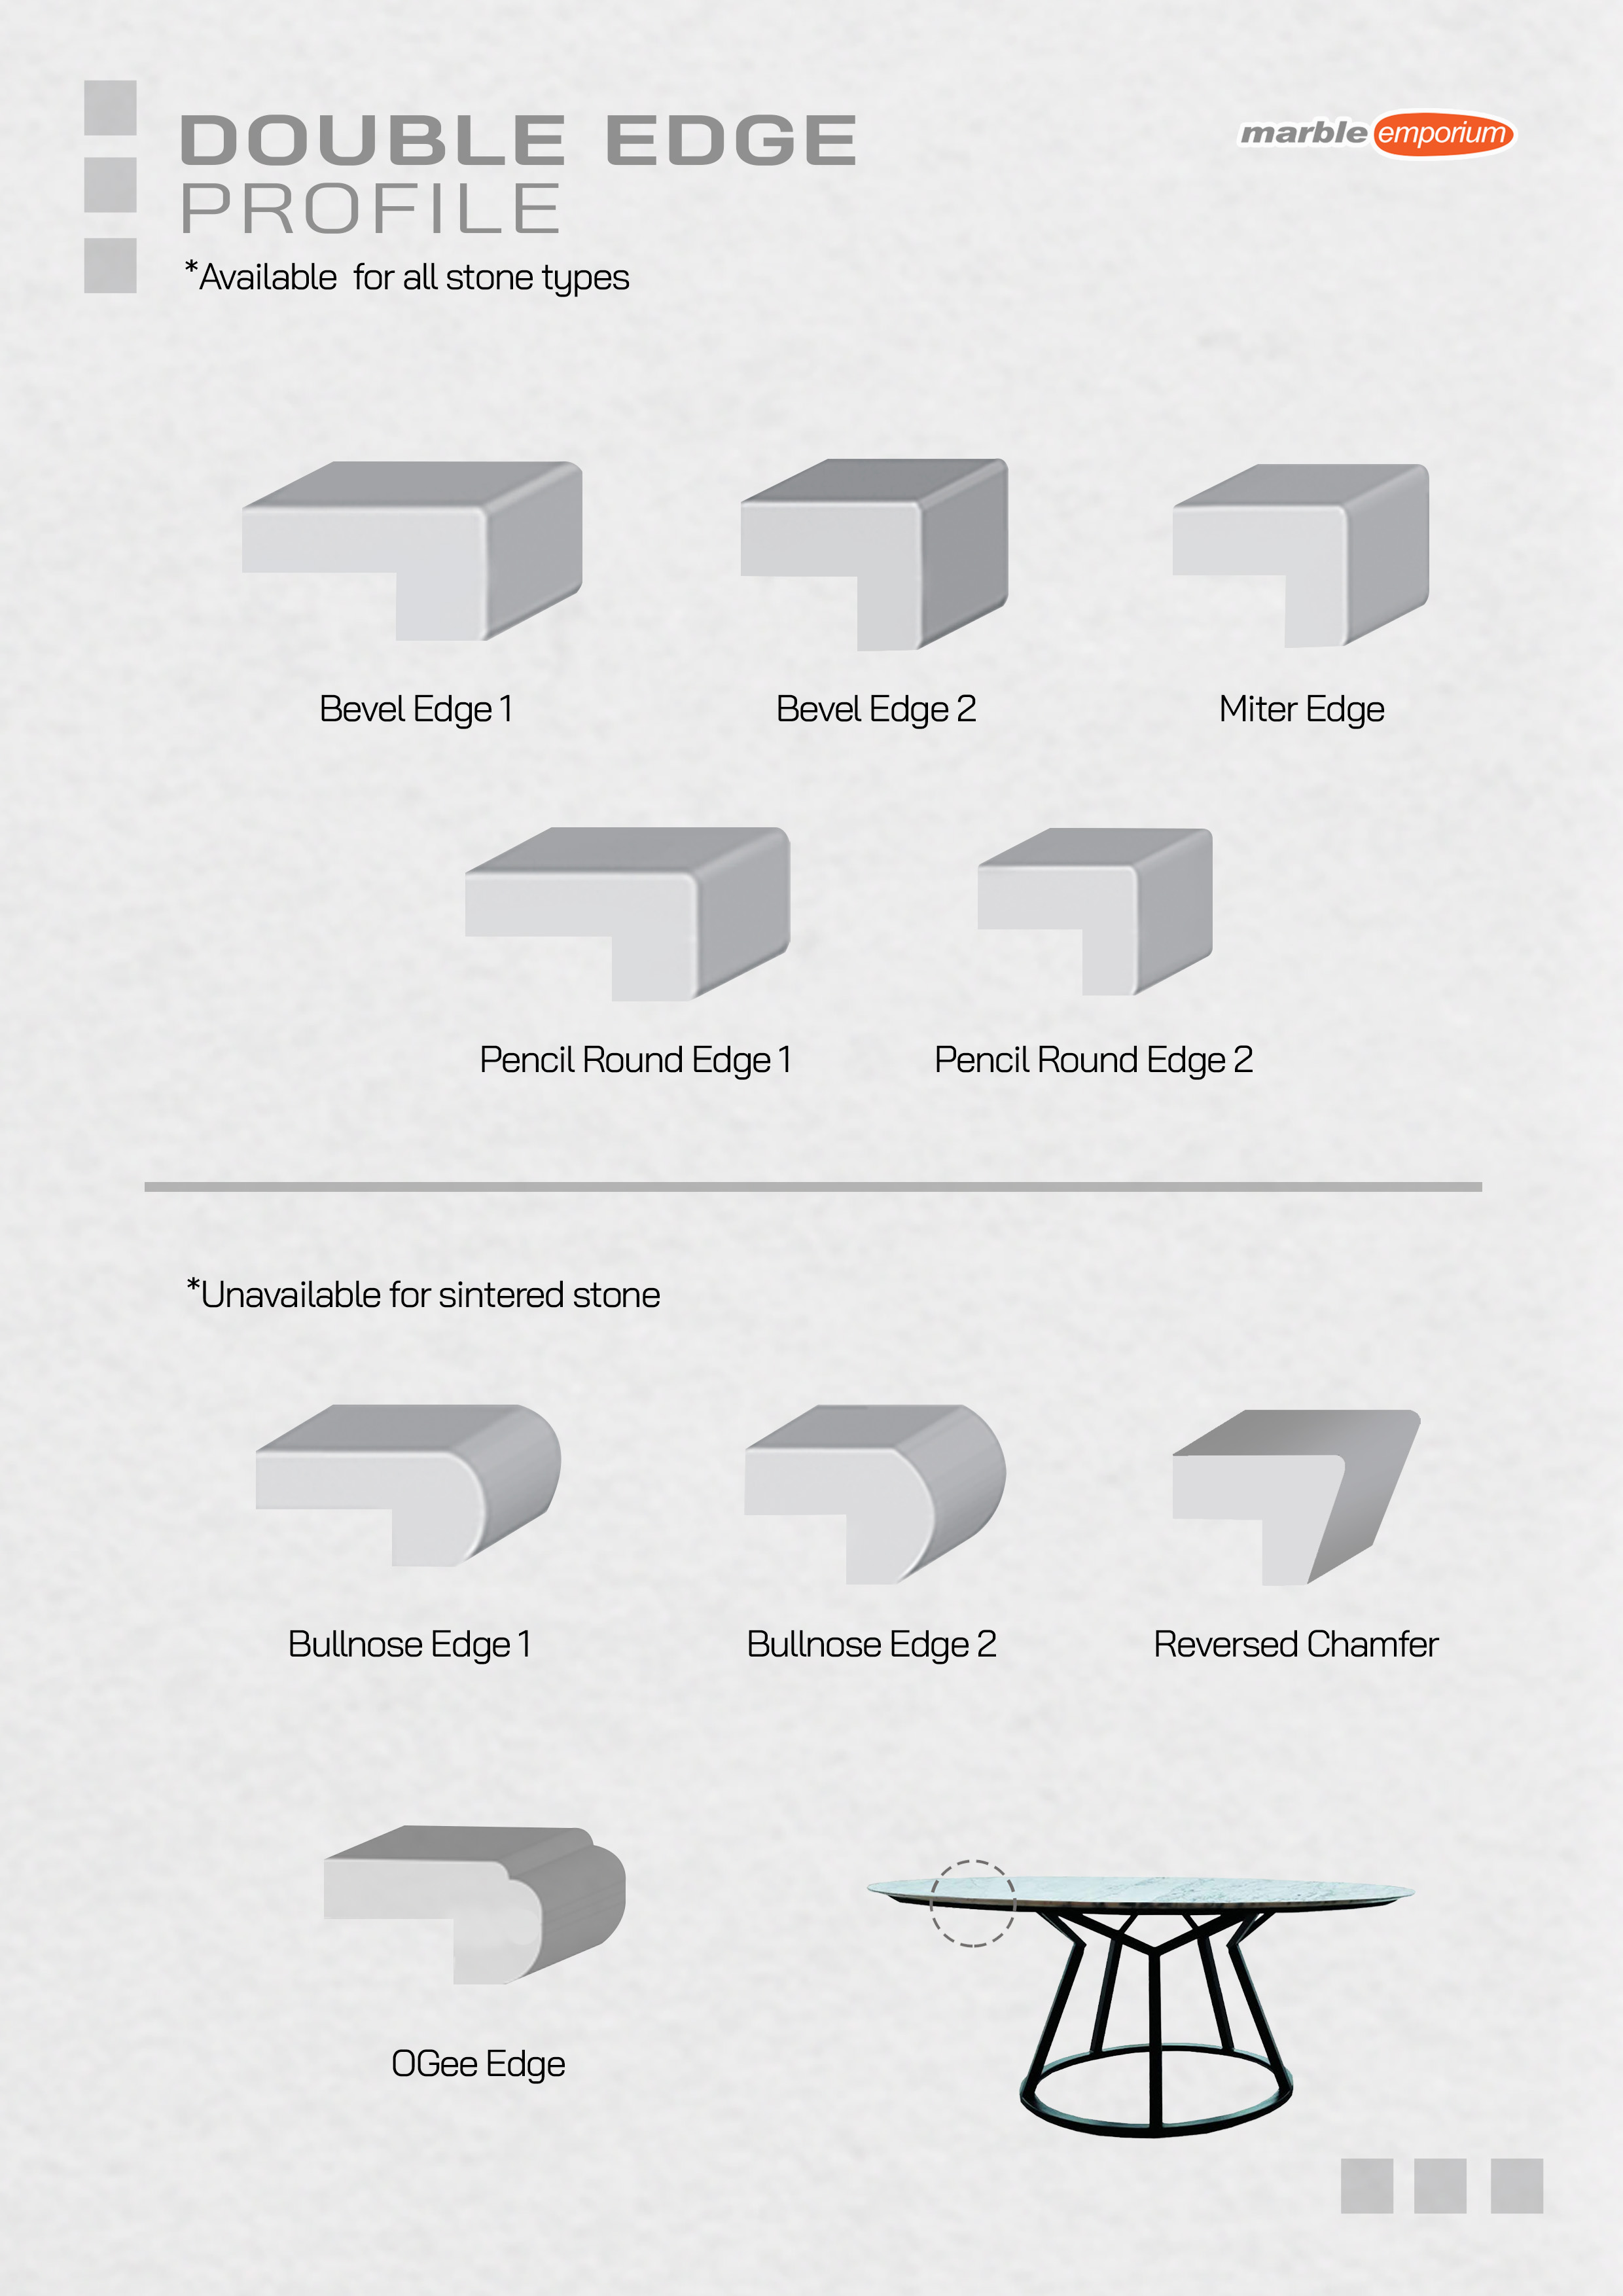 Marble Emporium | How we work page 10 - Double edge profile (*Available for all stone types) | Bevel Edge 1, Bevel Edge 2, Miter Edge, Pencil Round Edge 1, Pencil Round Edge 2, *Unavailable for sintered stone, Bullnose Edge 1, Bullnose Edge 2, Reversed Chamfer, OGee Edge